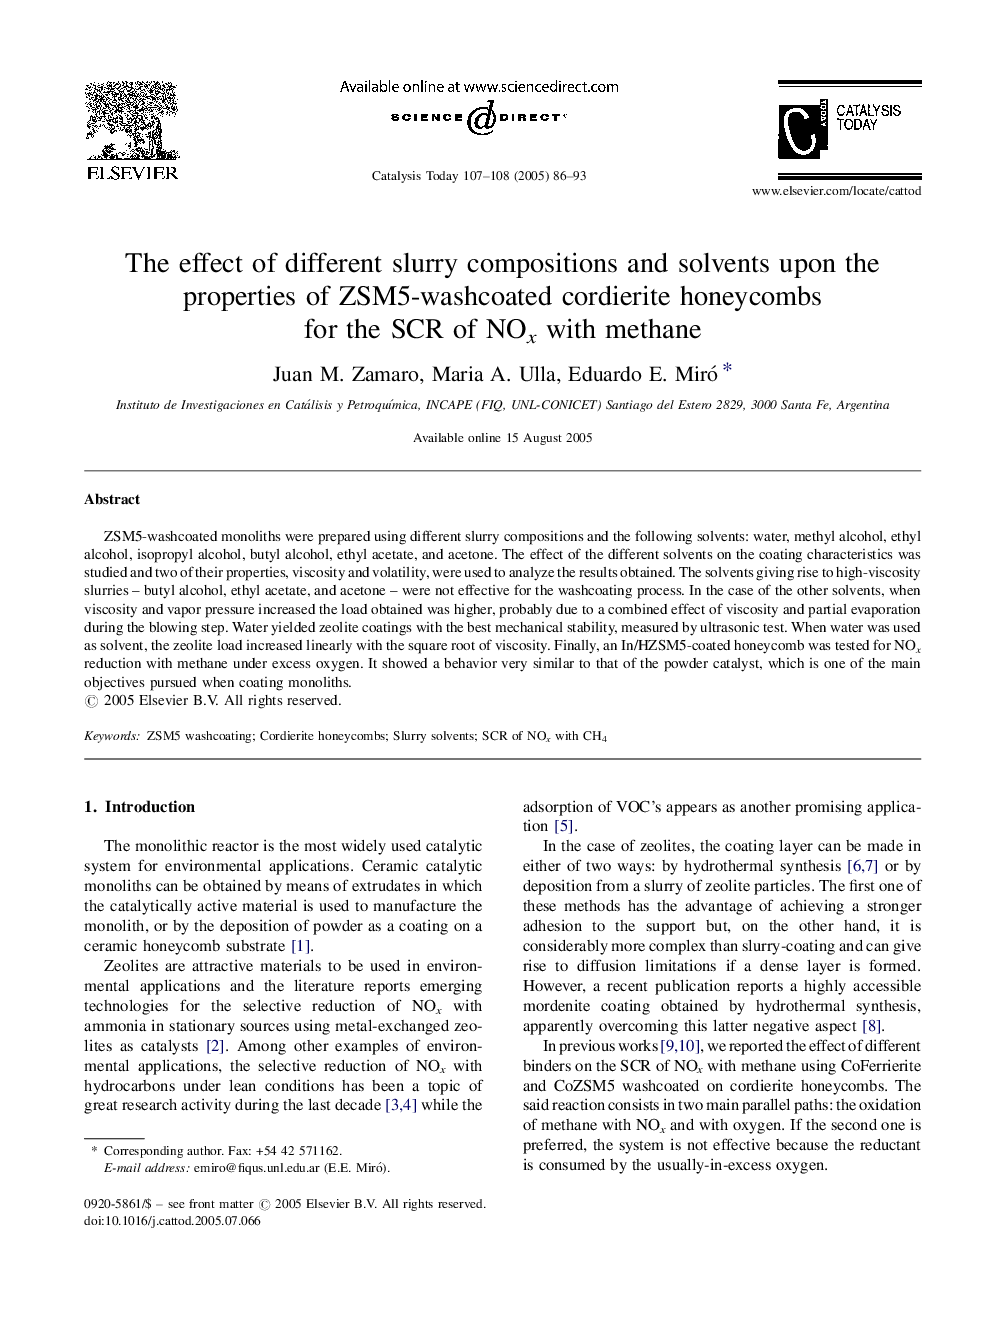 The effect of different slurry compositions and solvents upon the properties of ZSM5-washcoated cordierite honeycombs for the SCR of NOx with methane